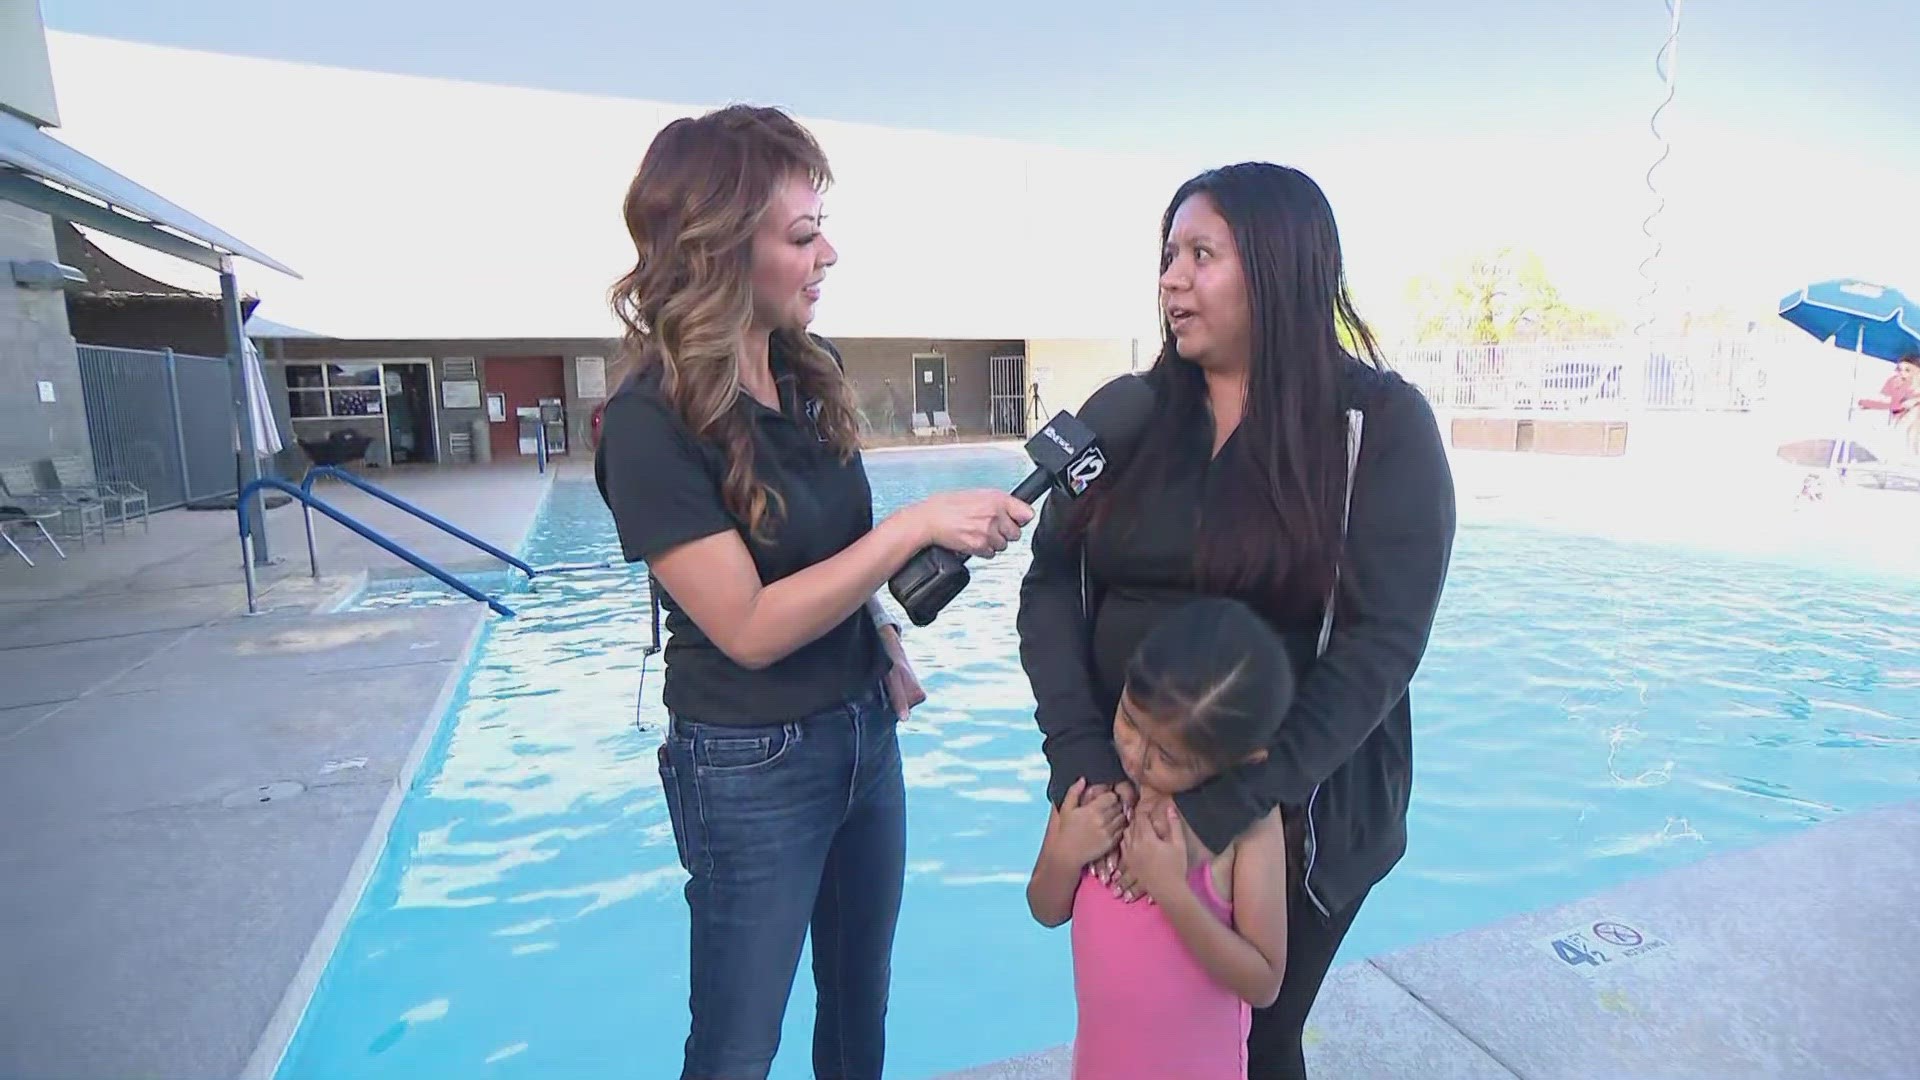 12News talks to a mother who has decided to learn to swim after seeing how proficient her daughter was in the water.